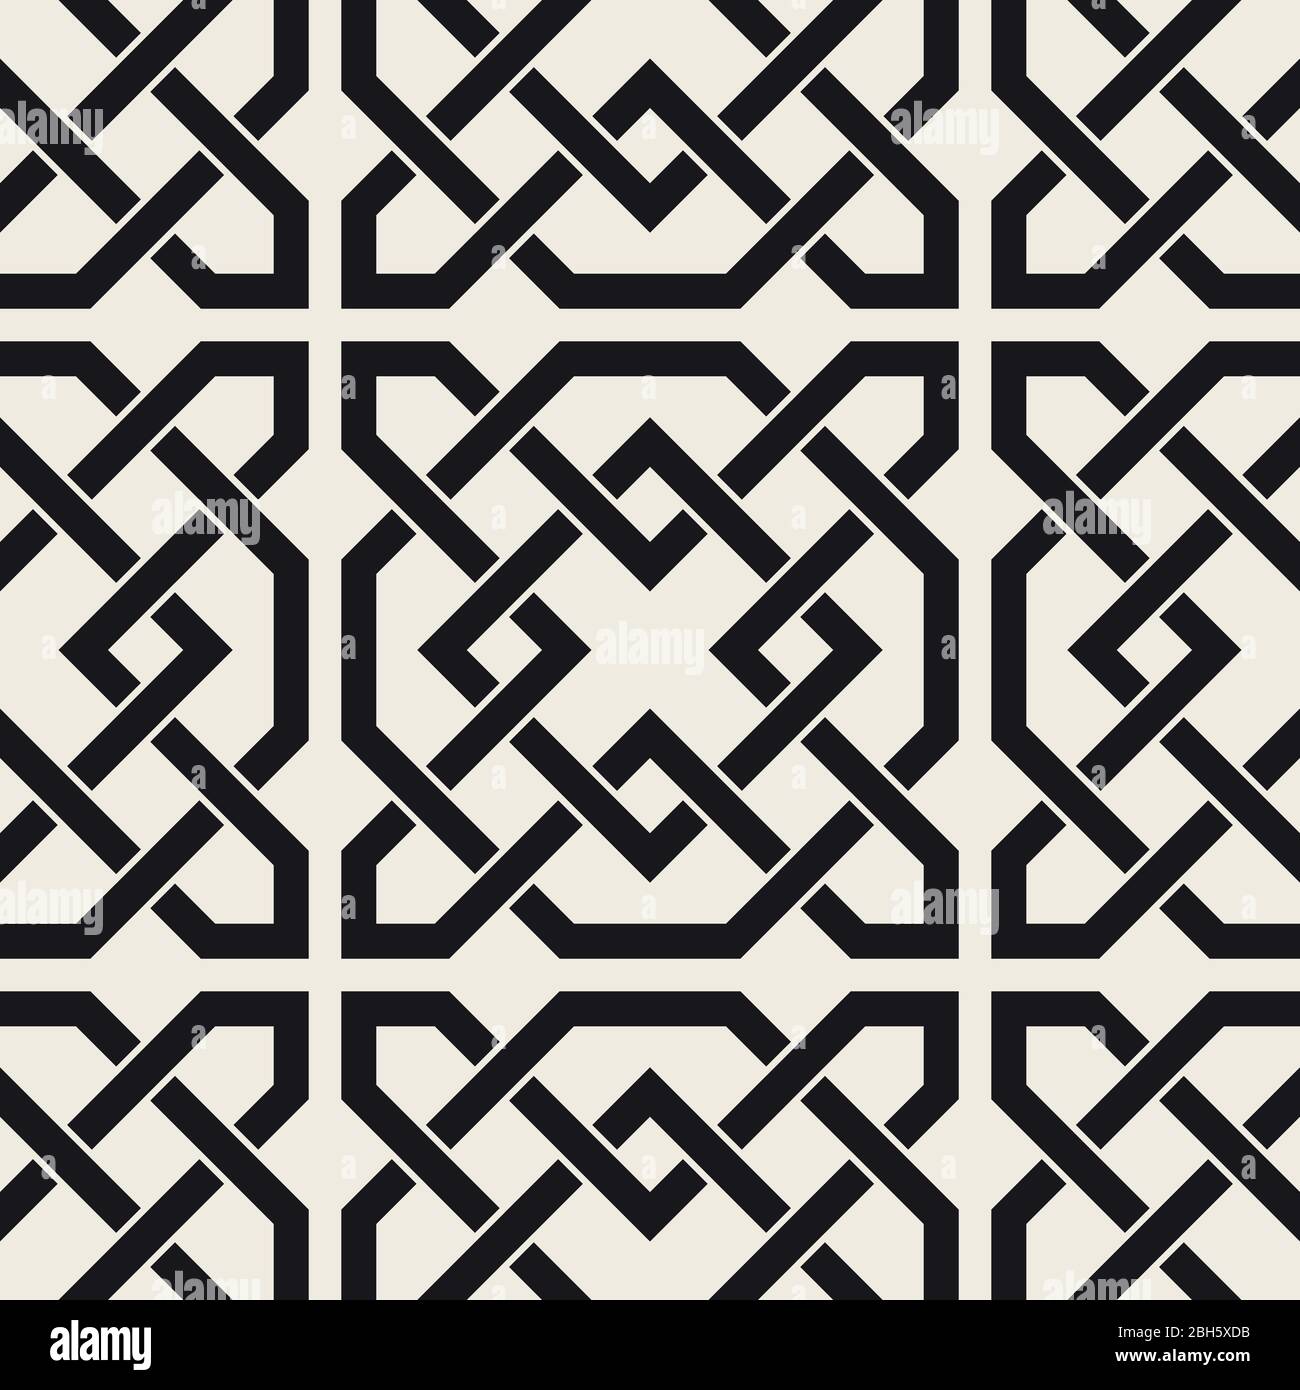 Vector seamless pattern. Abstract geometric lattice. Stylish ethnic design with interlaced lines. Stock Vector